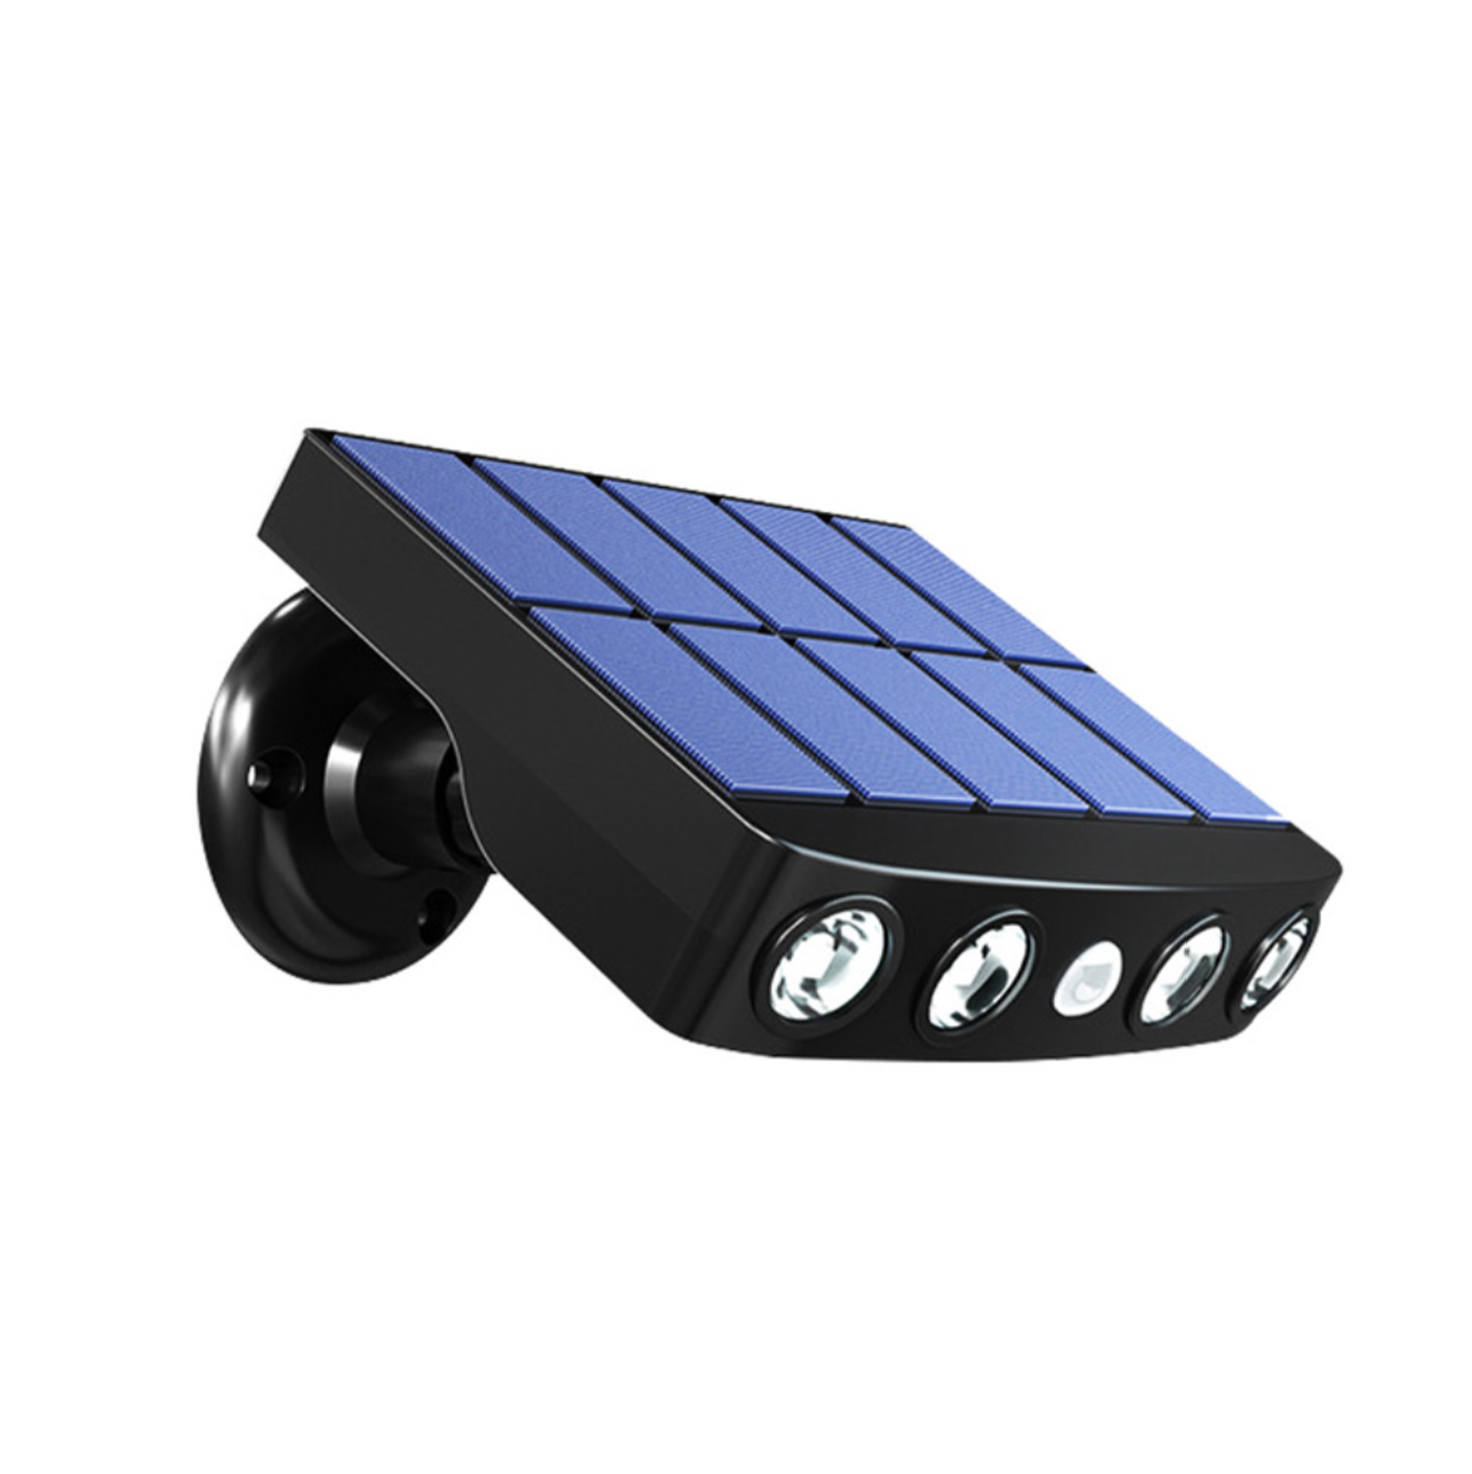 GuardSolar™- Wide-View Solar LED Security Light With Motion Sensor